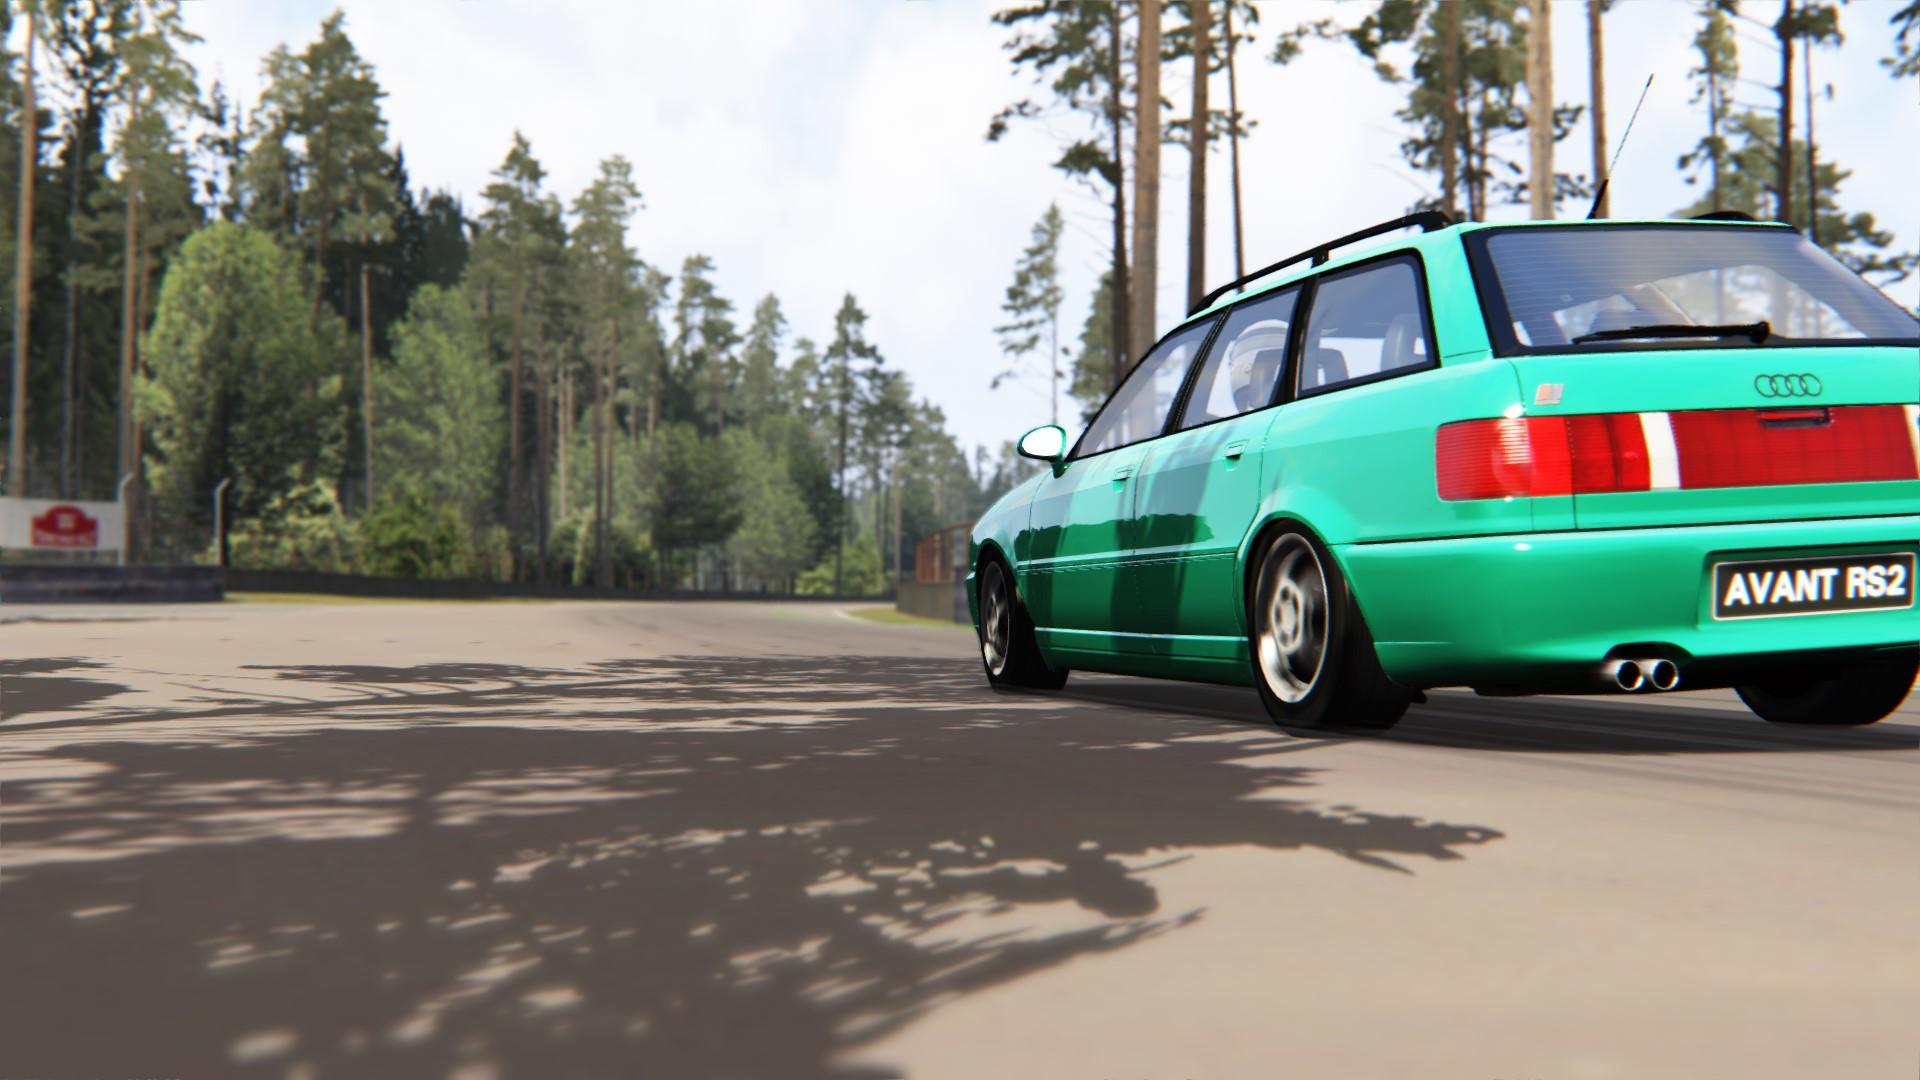 Audi RS2 in #assetto (do you want these daily?)